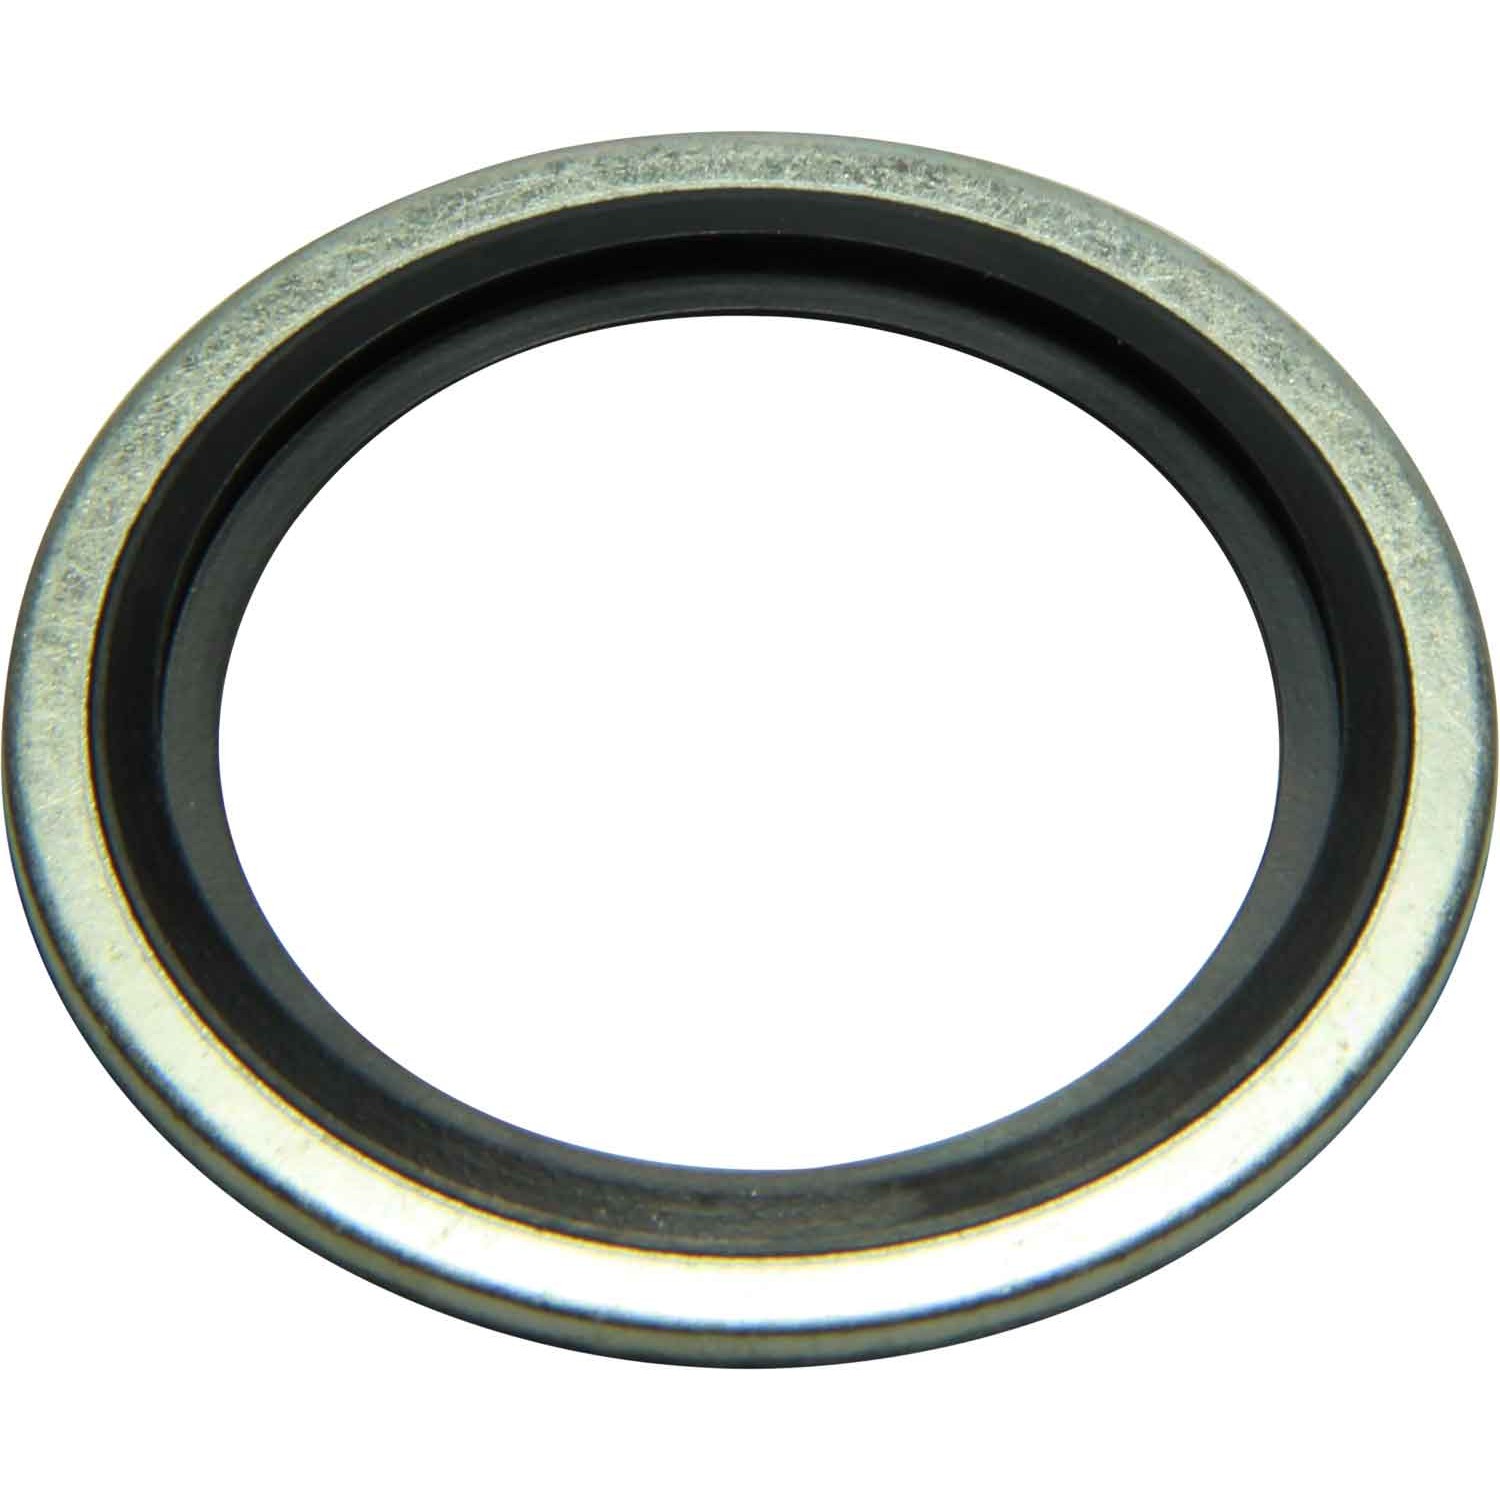 Water Oil,Fuel Resistant Top Quality Details about   Dowty seal bonded washer M20 Pack of 8 